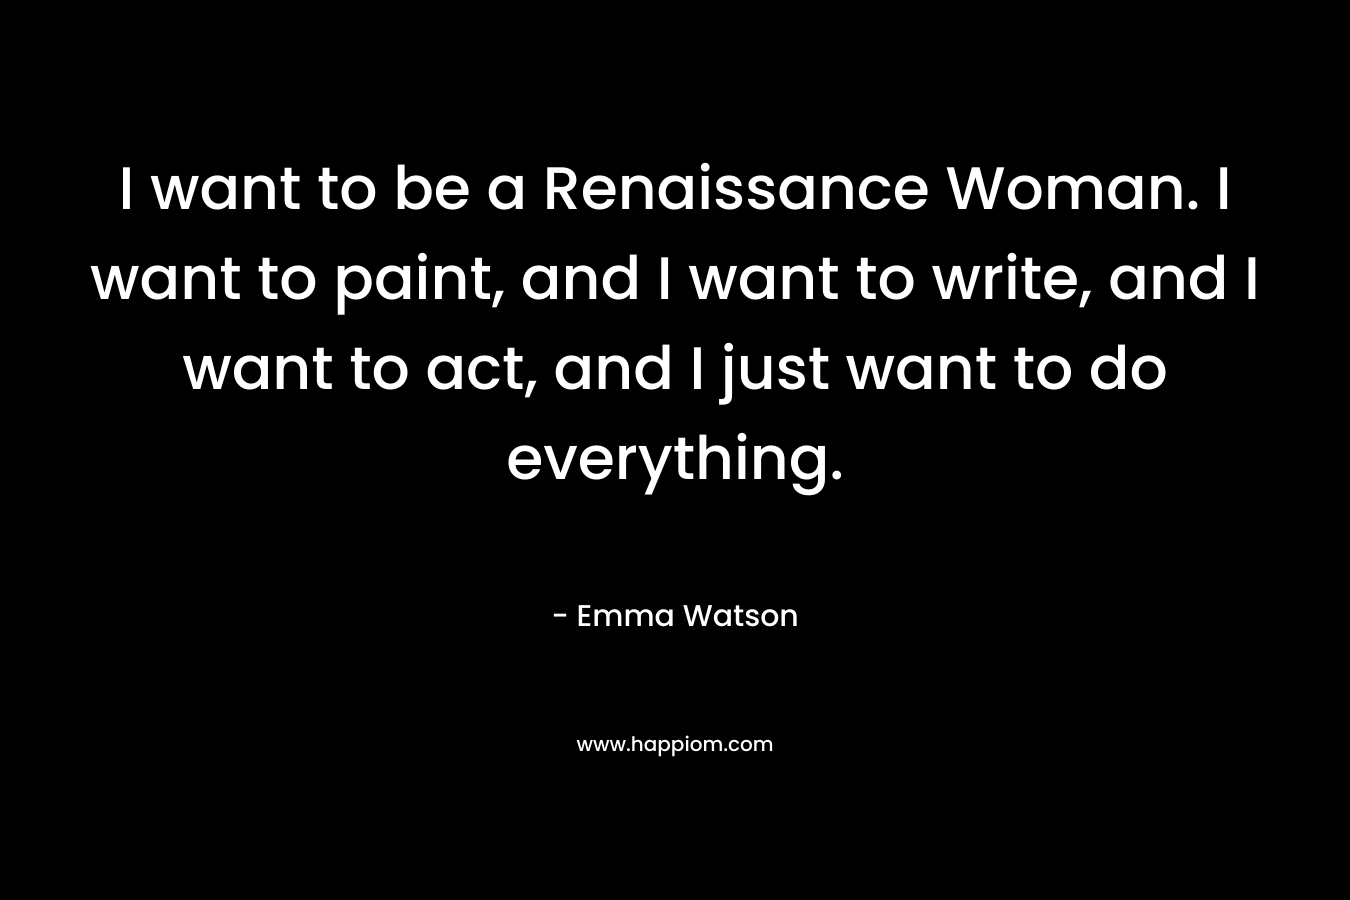 I want to be a Renaissance Woman. I want to paint, and I want to write, and I want to act, and I just want to do everything. – Emma Watson